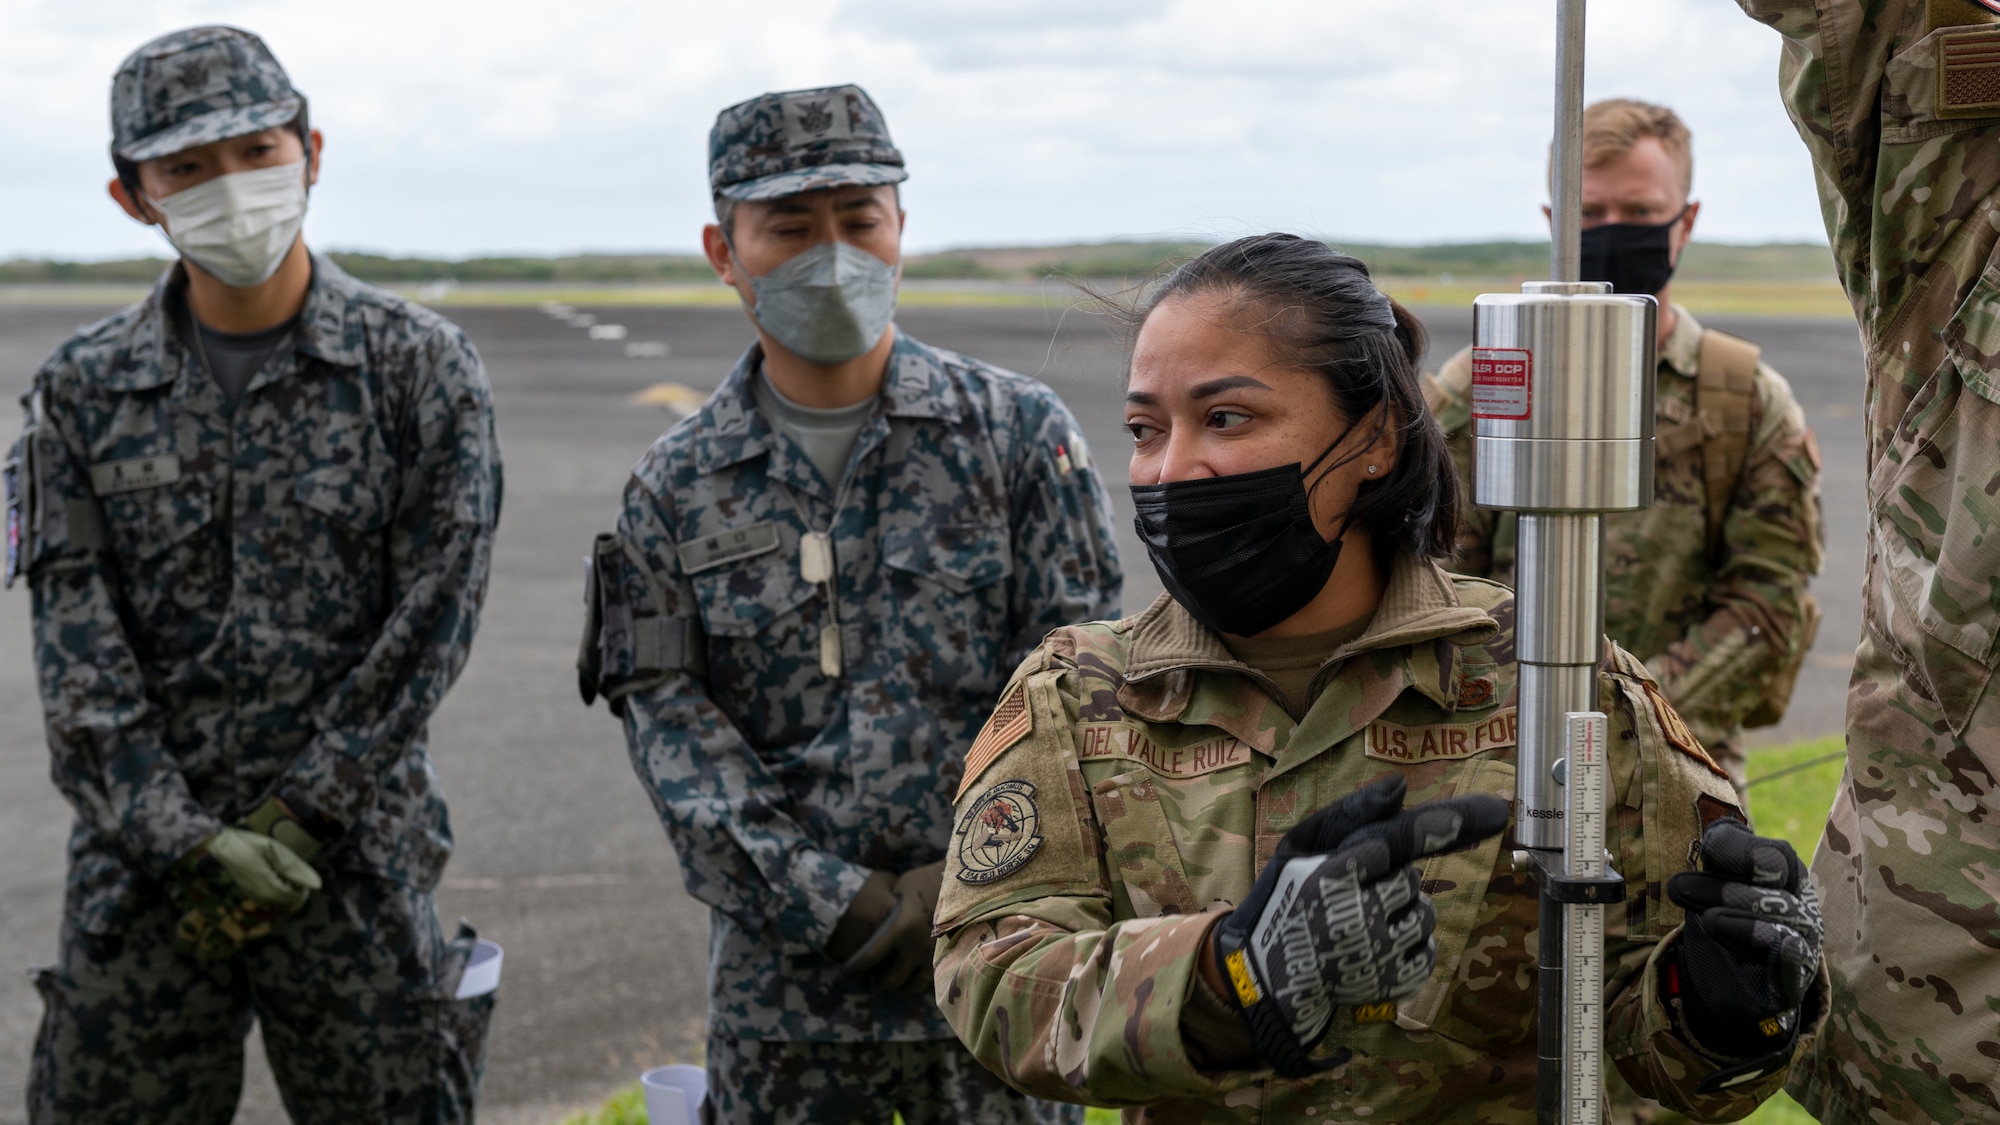 U.S. Air Force Master Sgt. Yelida Del Valle Ruiz, 554th Red Horse Squadron contingency airfield pavement evaluator, instructs Japan Maritime Self-Defense Force members on how to use a Dynamic Cone Penetrometer (DCP) for airfield survey operations during the Cope North 23 exercise, on the remote island of Iwo Jima, Japan, Feb. 21, 2023.